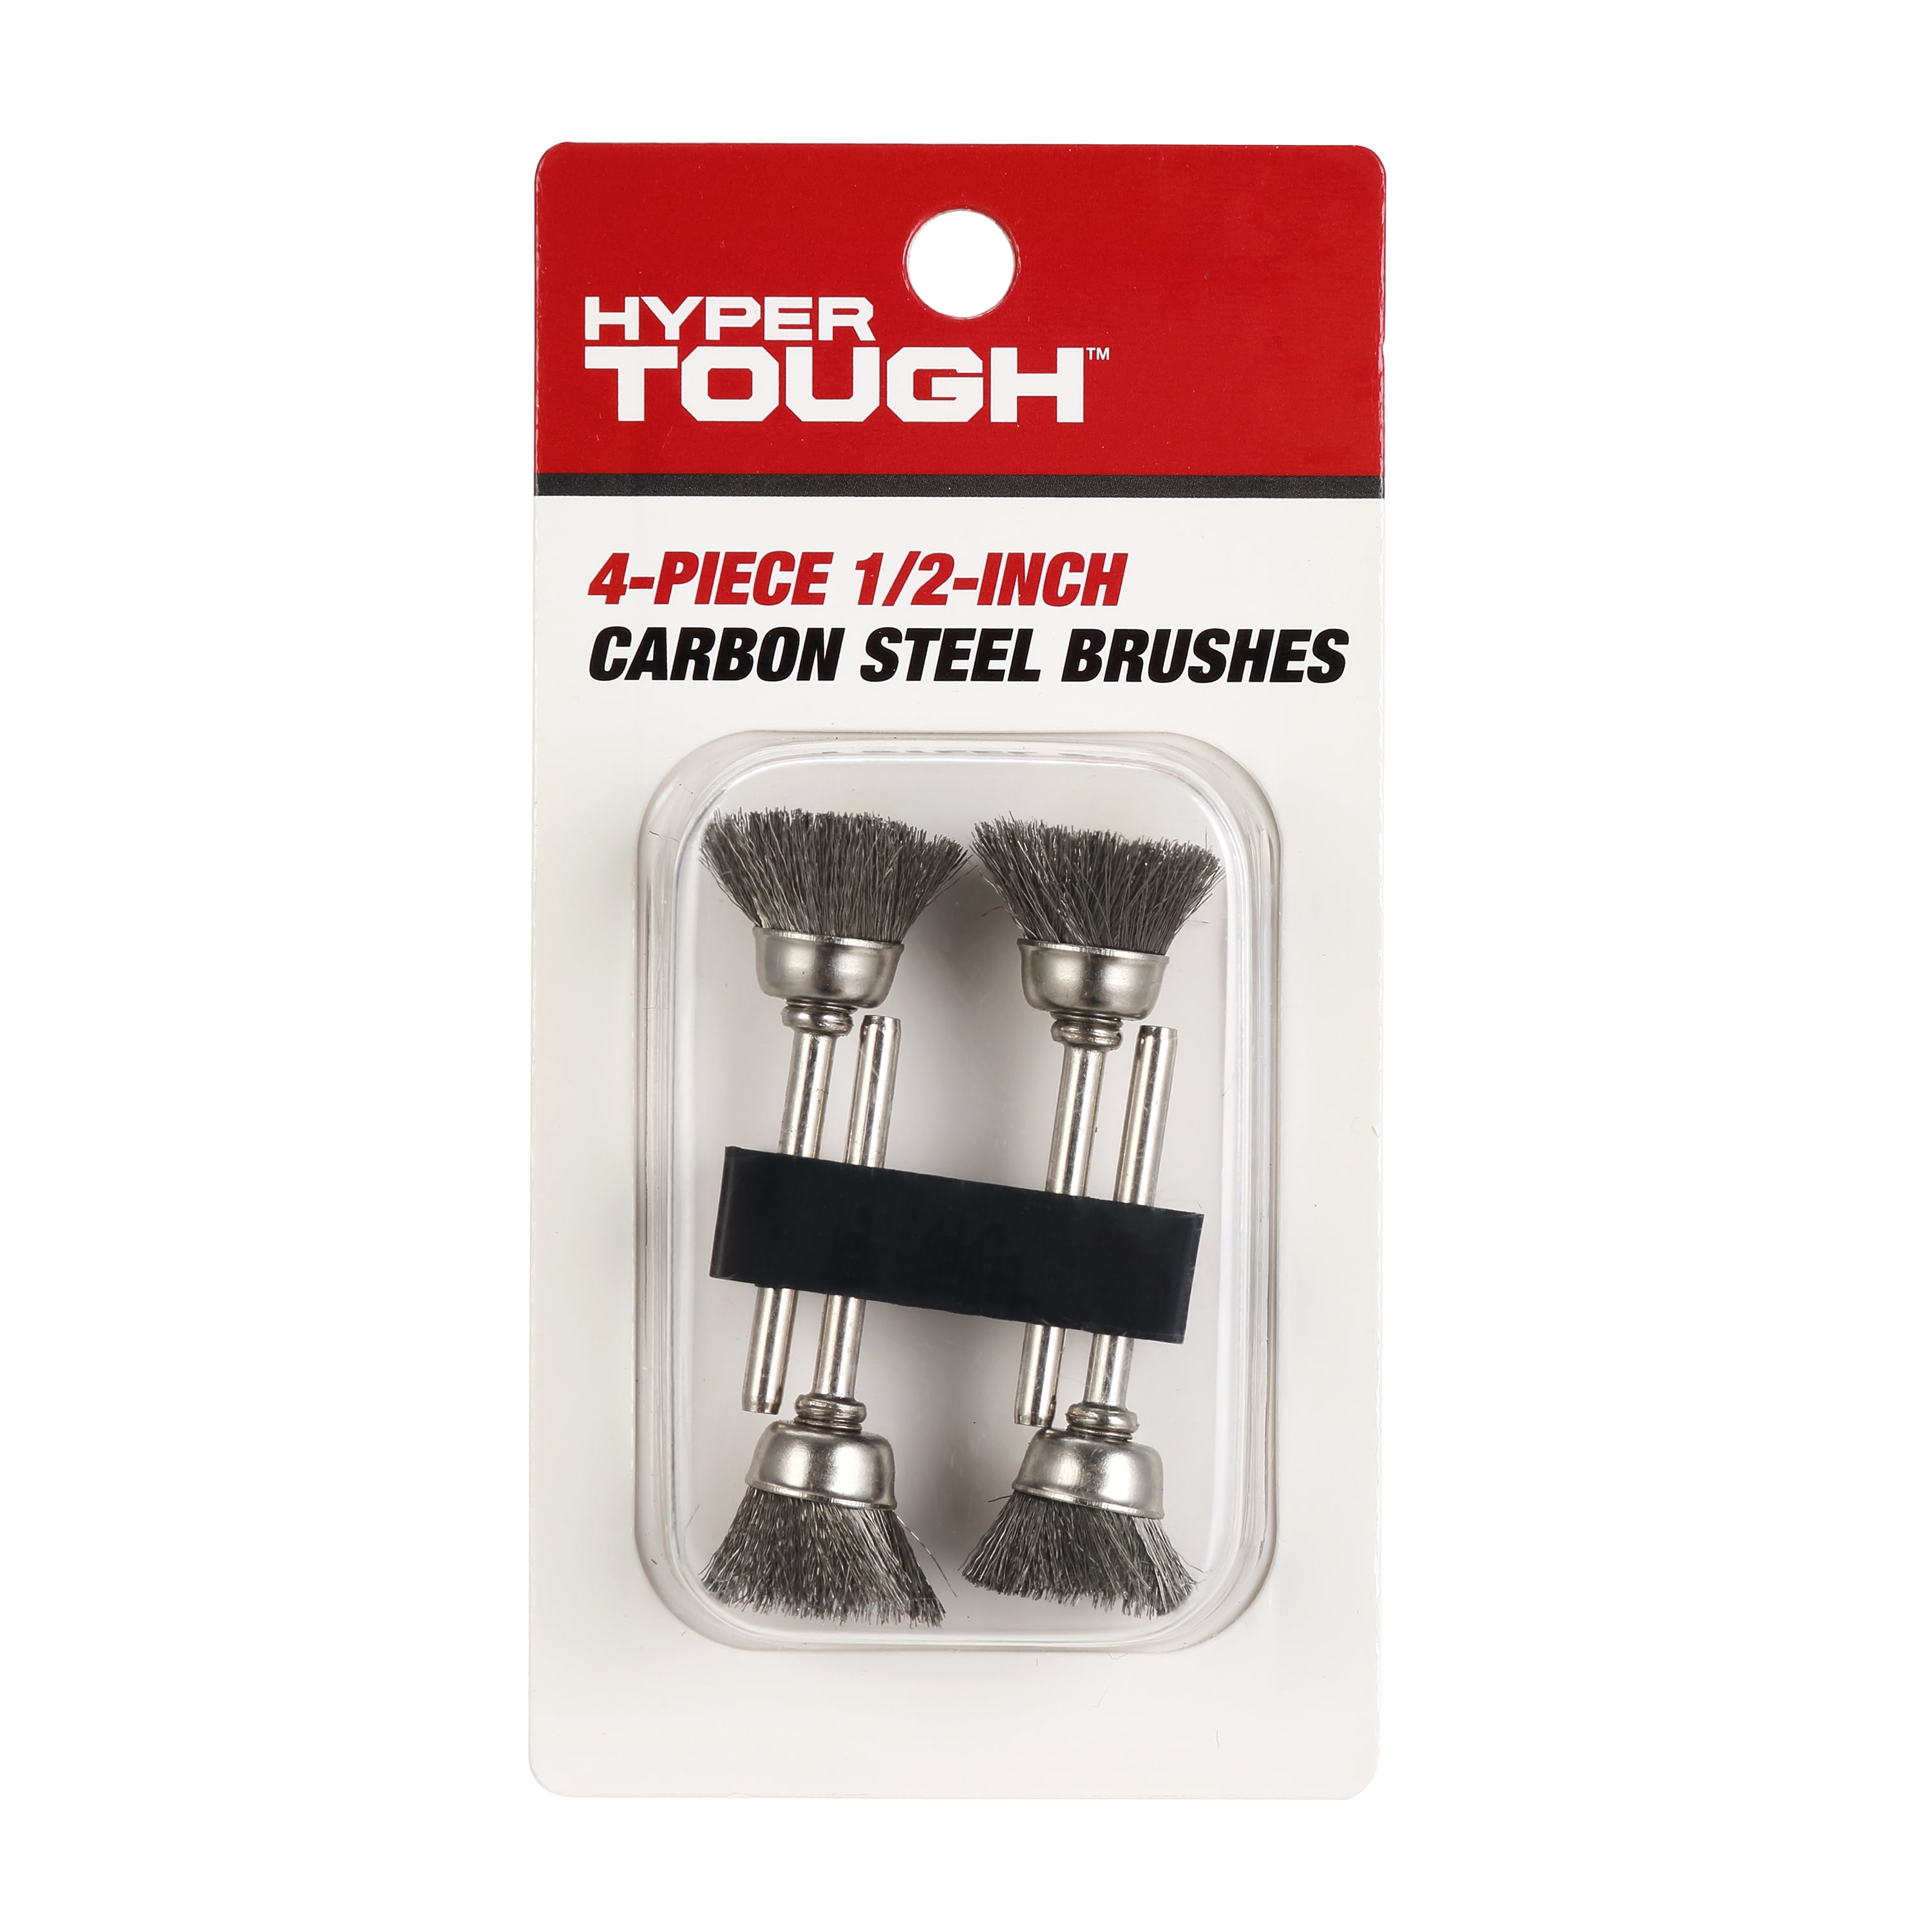 Hyper Tough 4 Piece 1/2 inch Carbon Steel Brushes